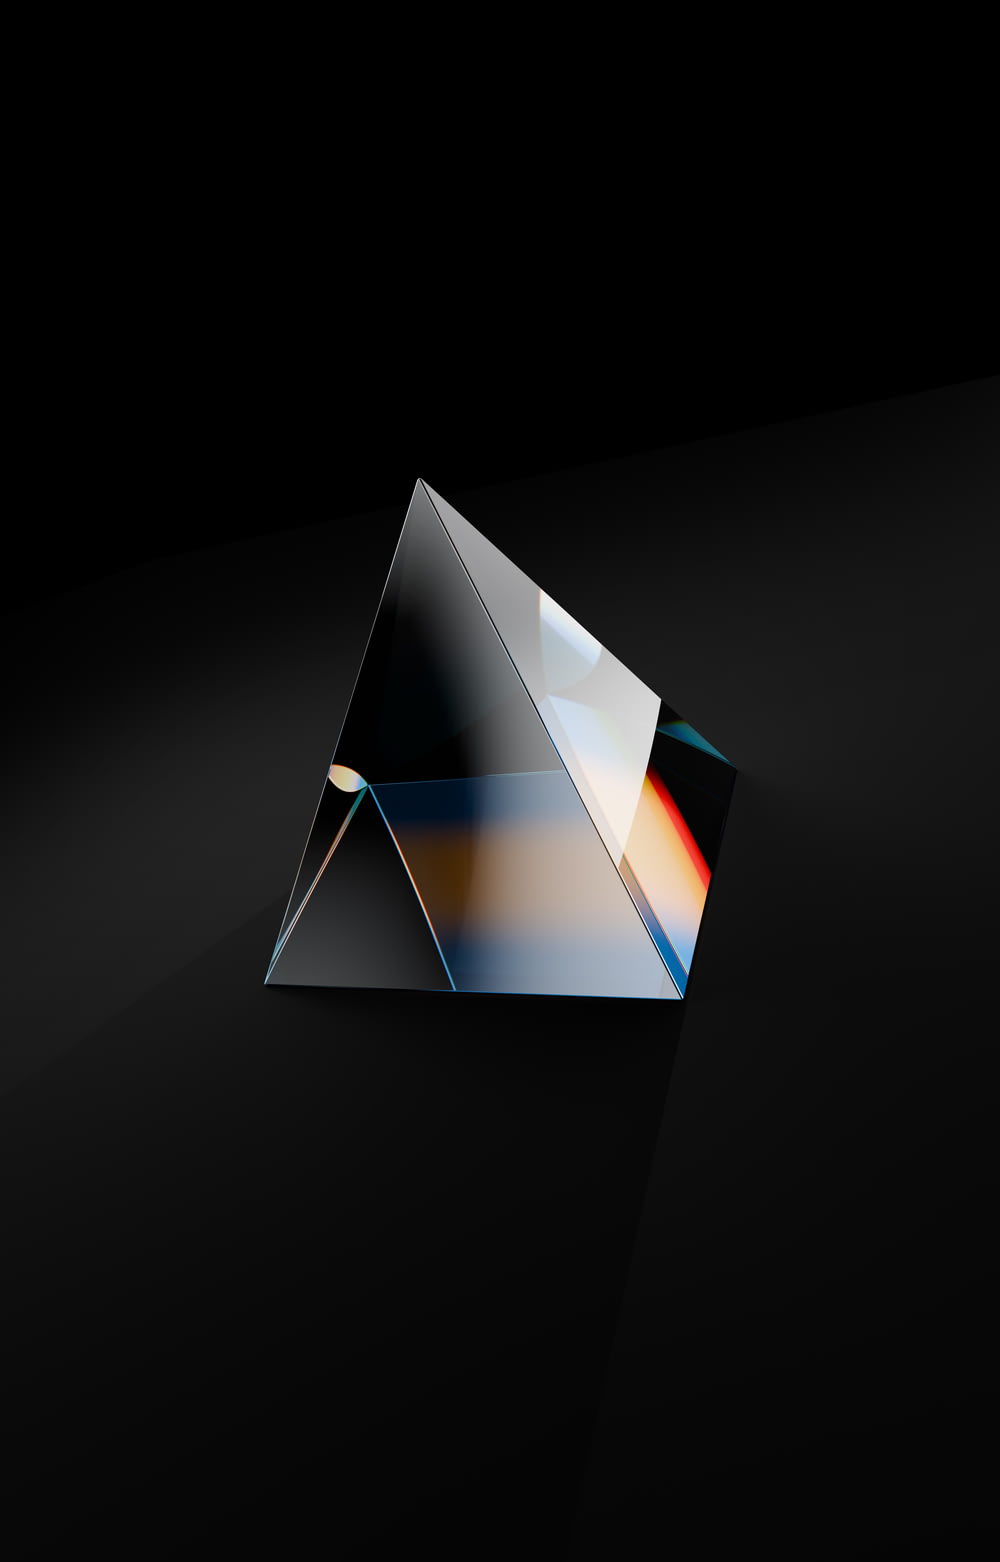 a black background with a triangle shaped object